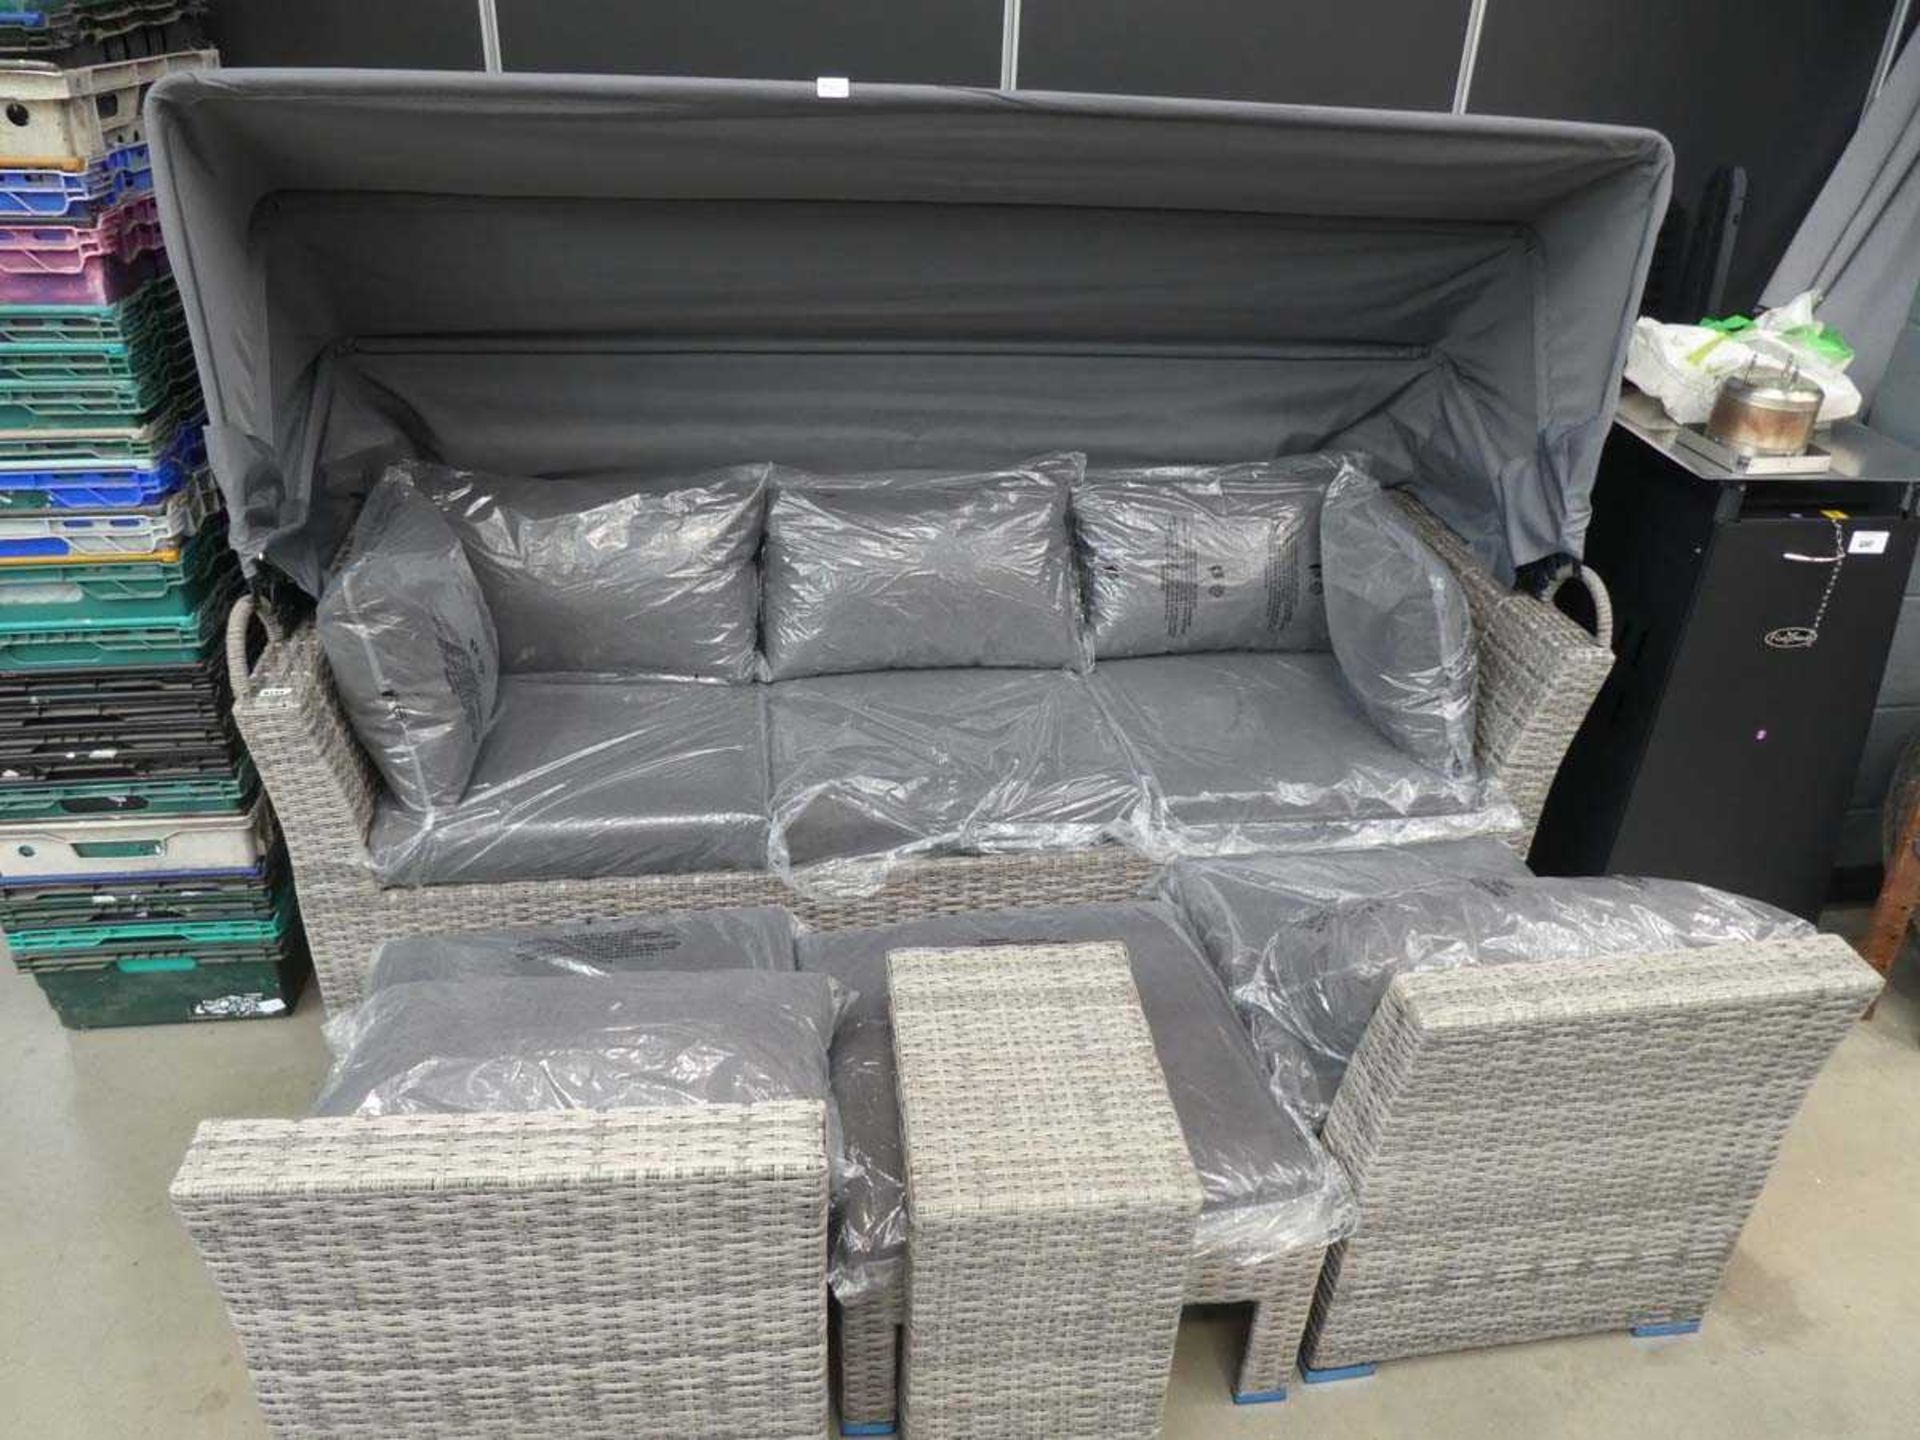 +VAT Large 3 seater rattan garden sofa with canopy, 2 matching chairs and 2 side tables